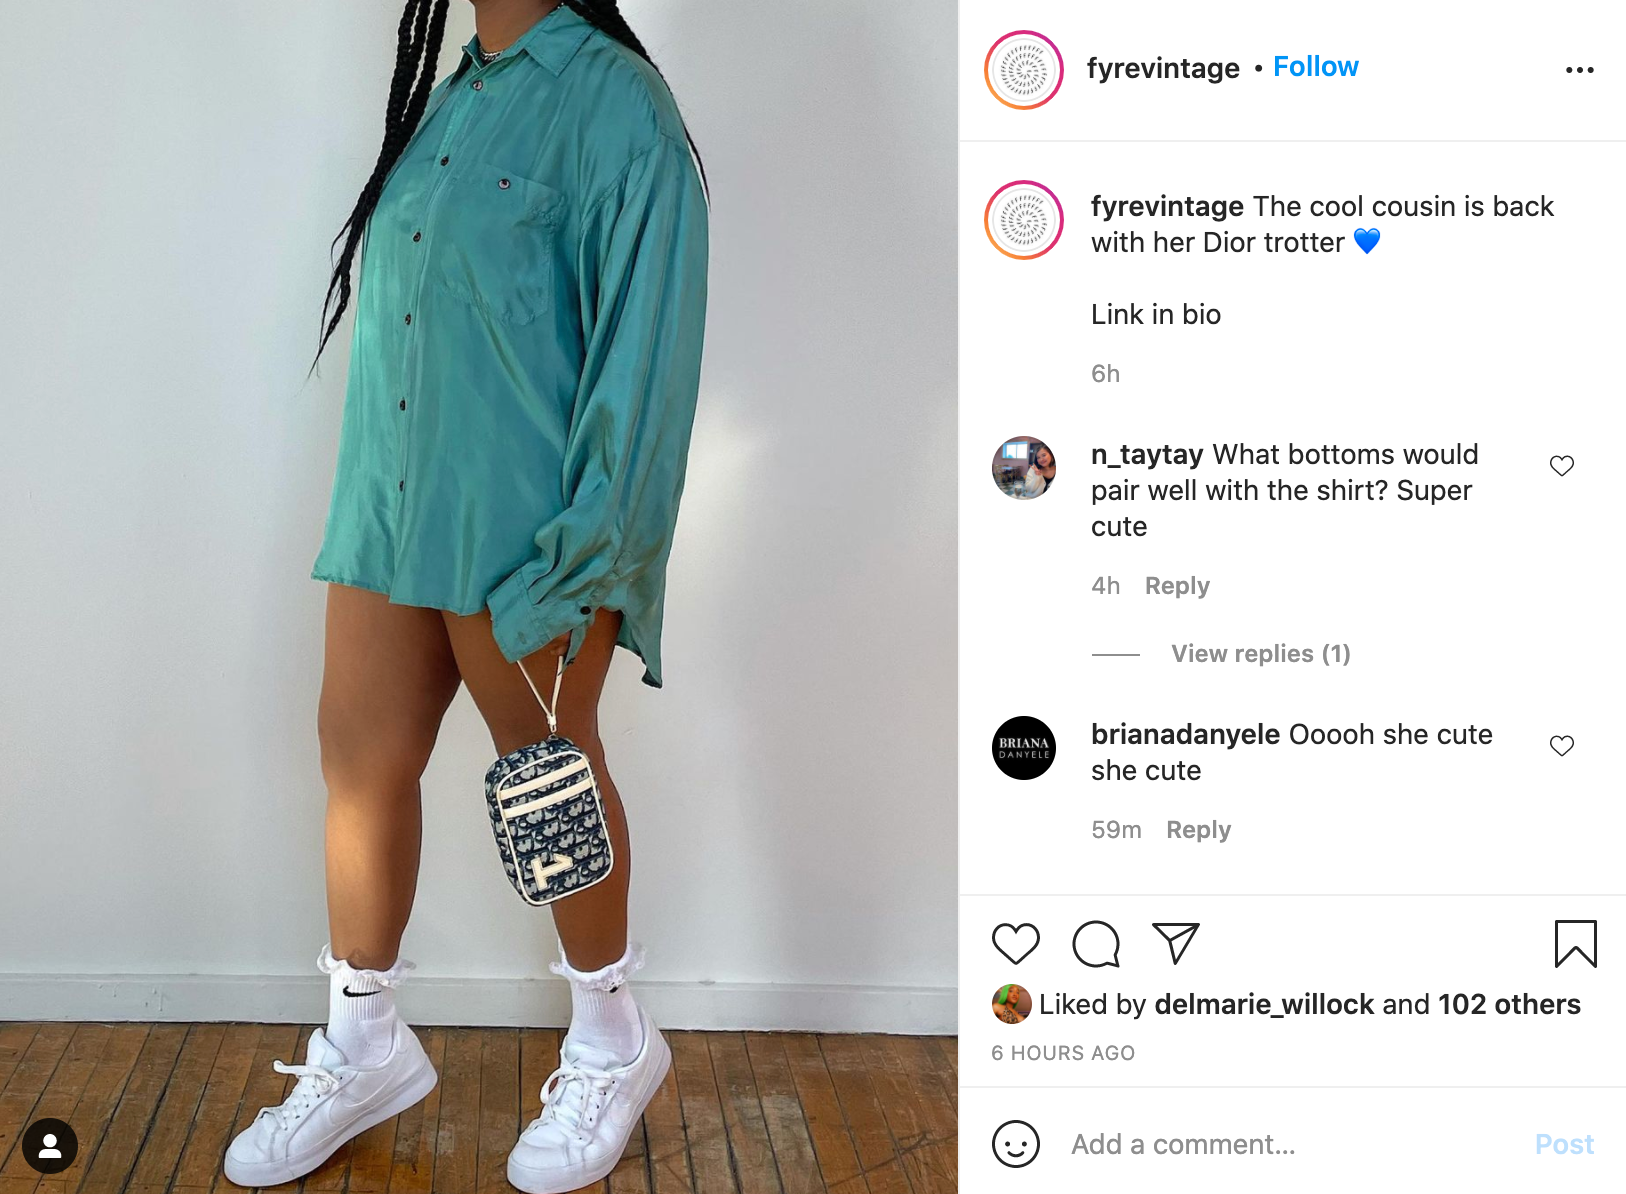 Instagram post from FYRE VINTAGE featuring a model wearing a long teal shirt